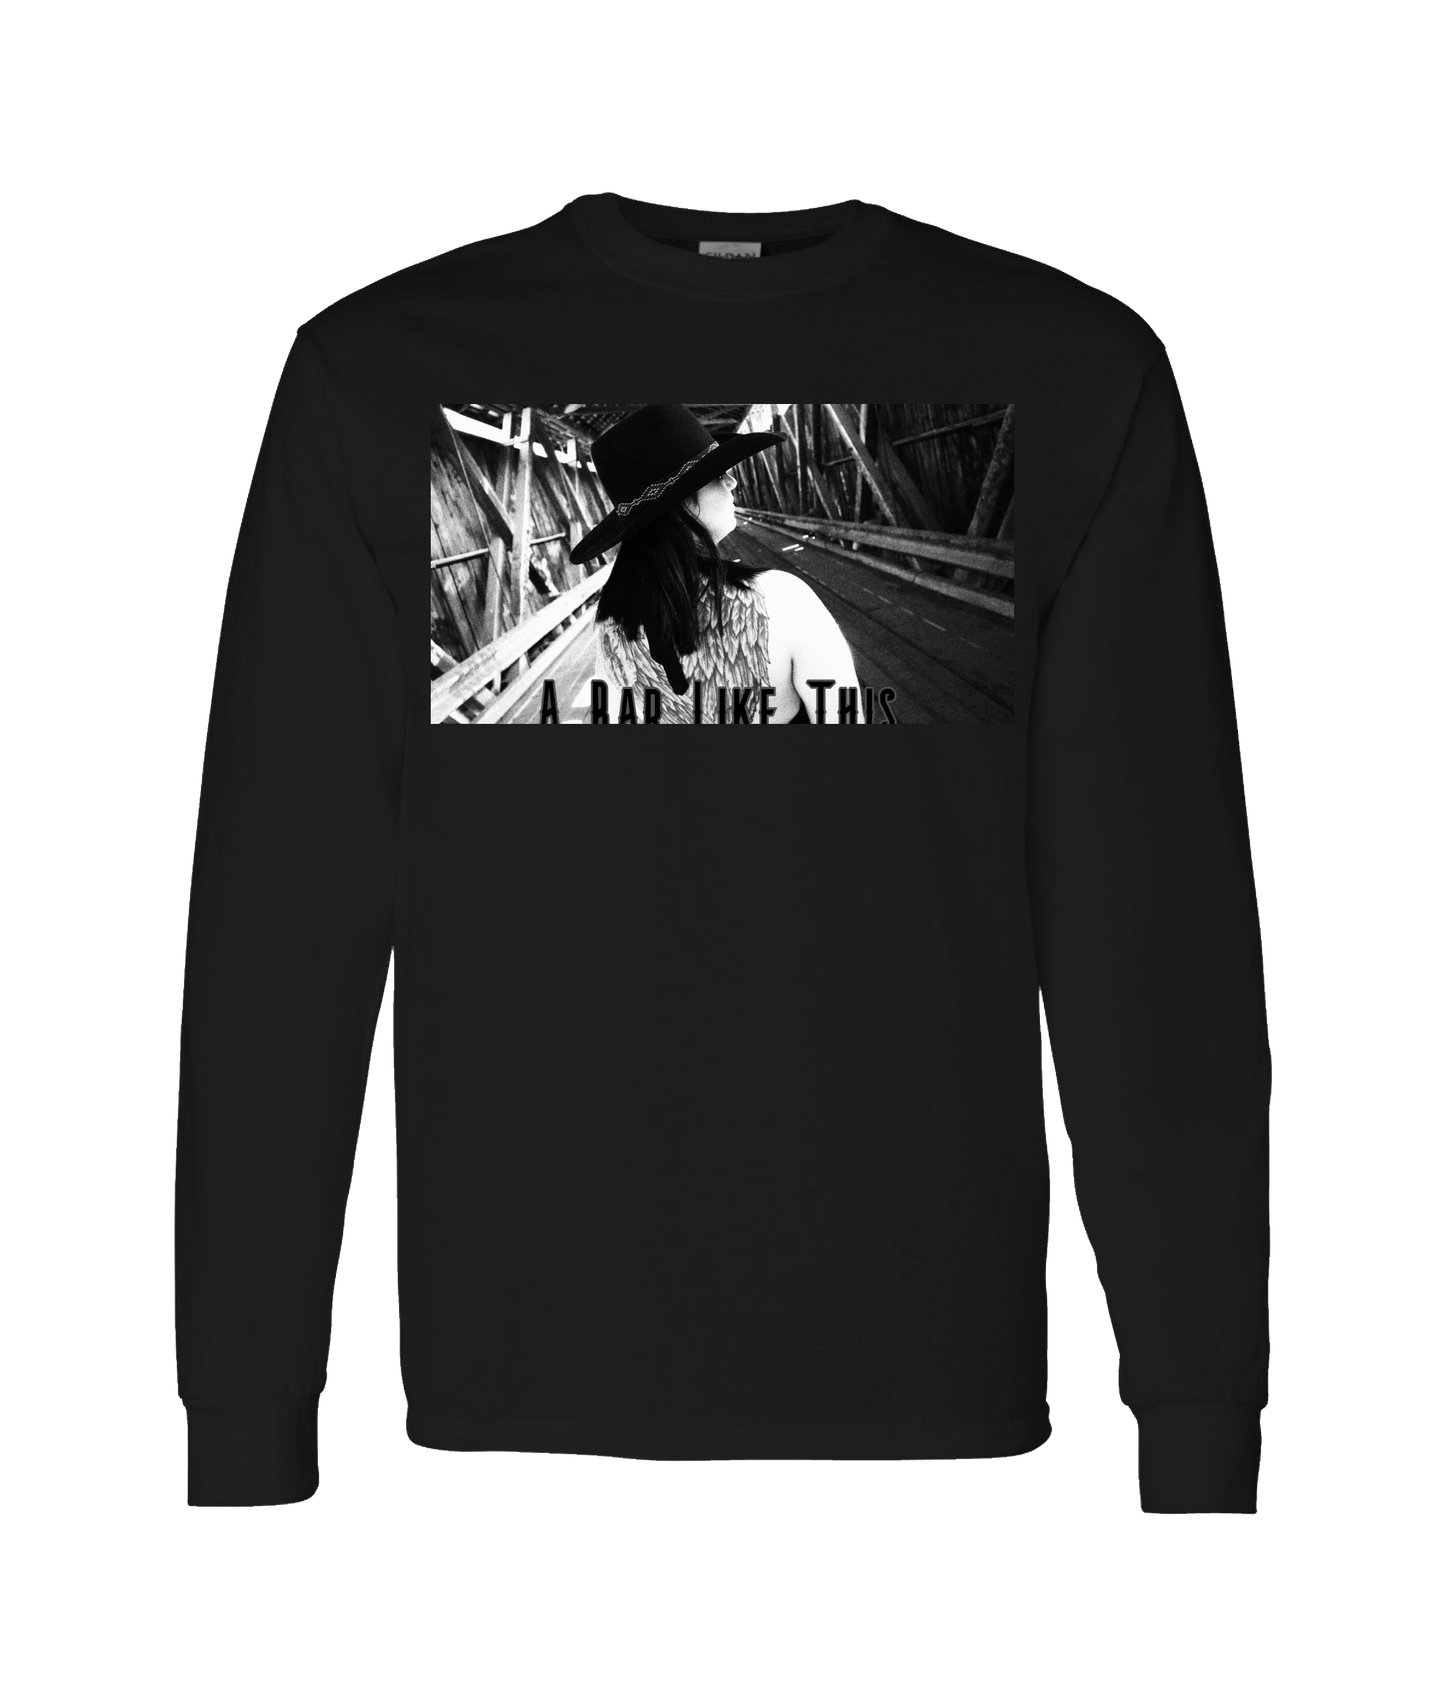 Michael Cage - A Bar Like This - Black Long Sleeve T